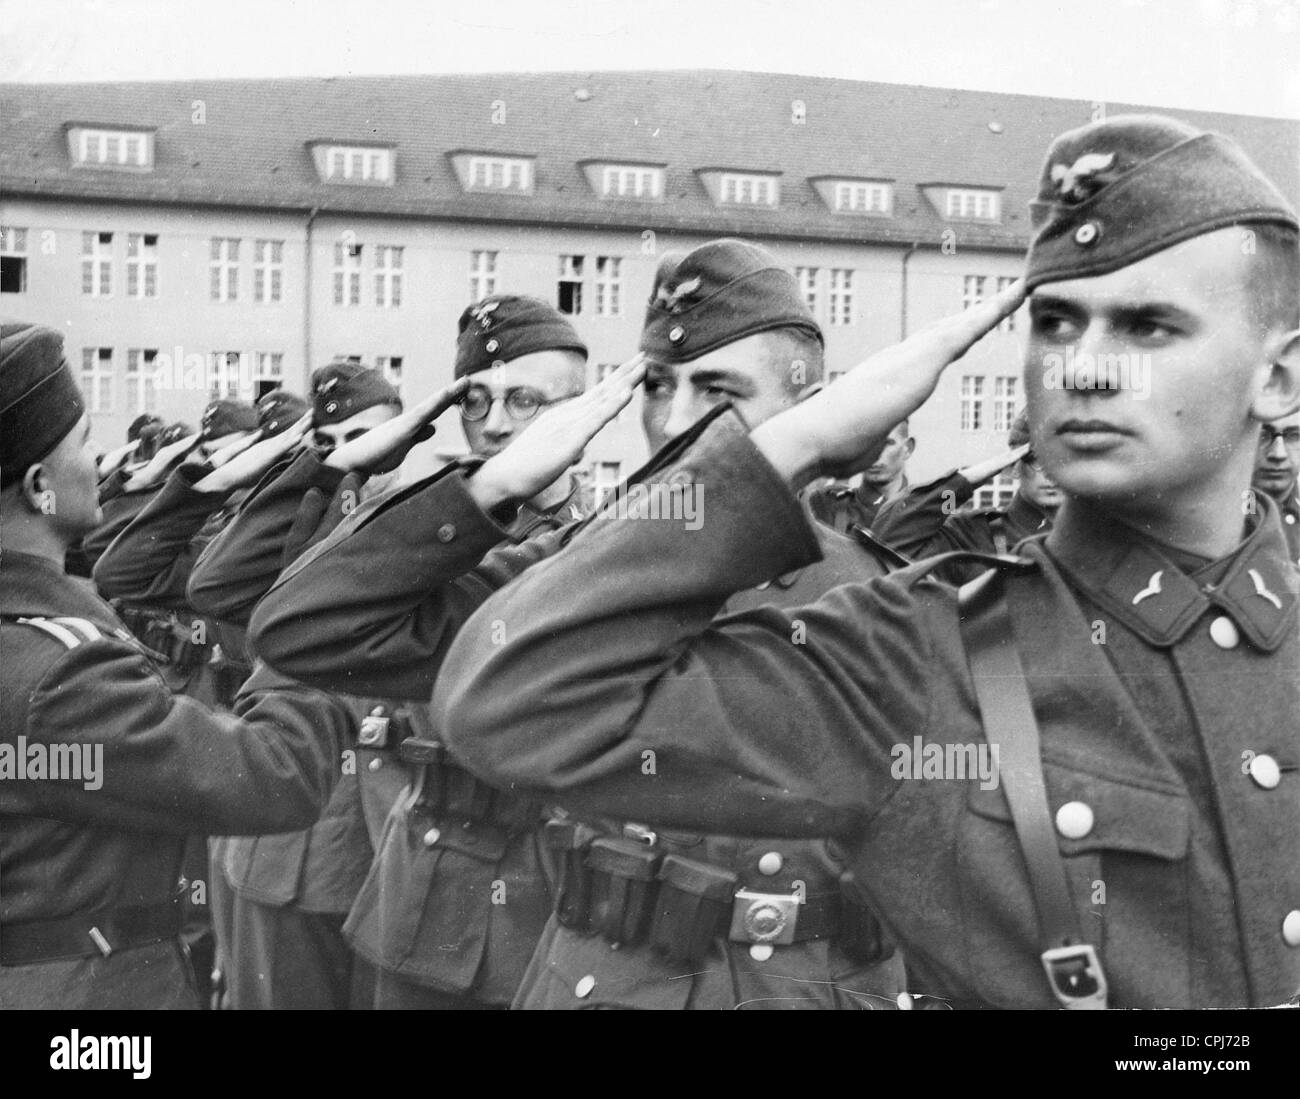 Recruits practicing honors, 1938 Stock Photo